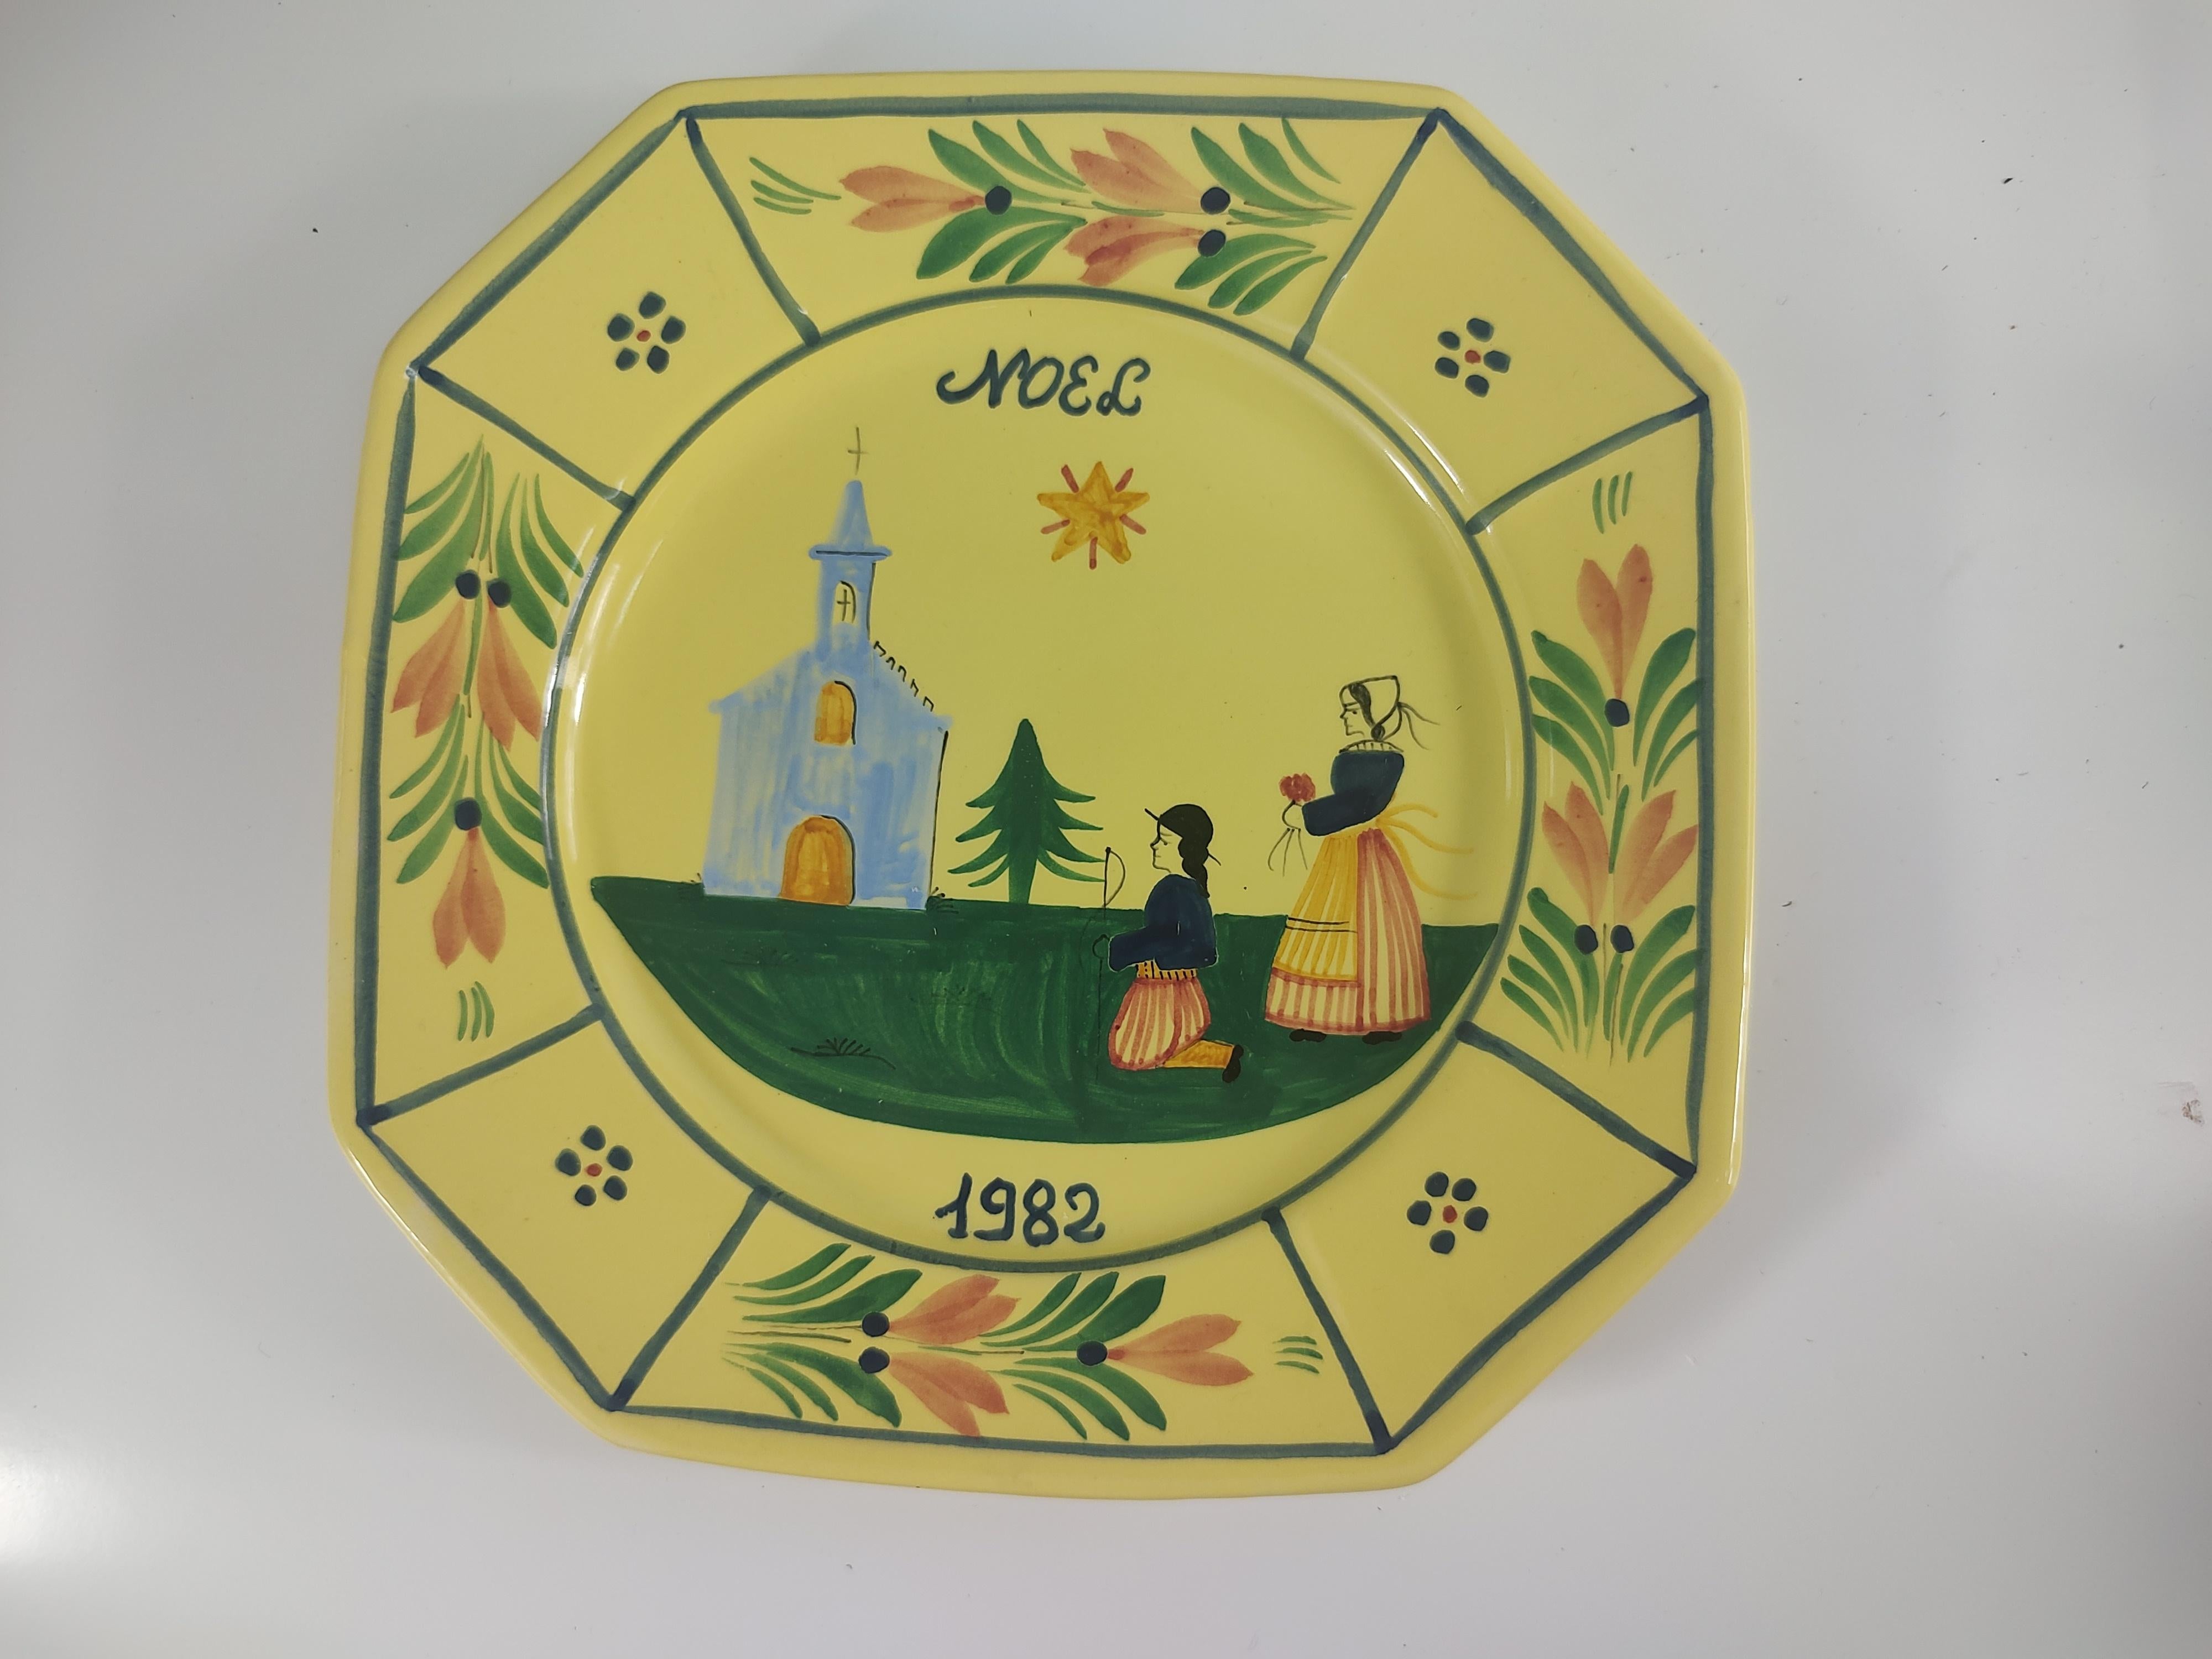 Quimper Noel 1982 Christmas Plate with Breton Peasant Figures in a Spiritual Set In Good Condition For Sale In Port Jervis, NY